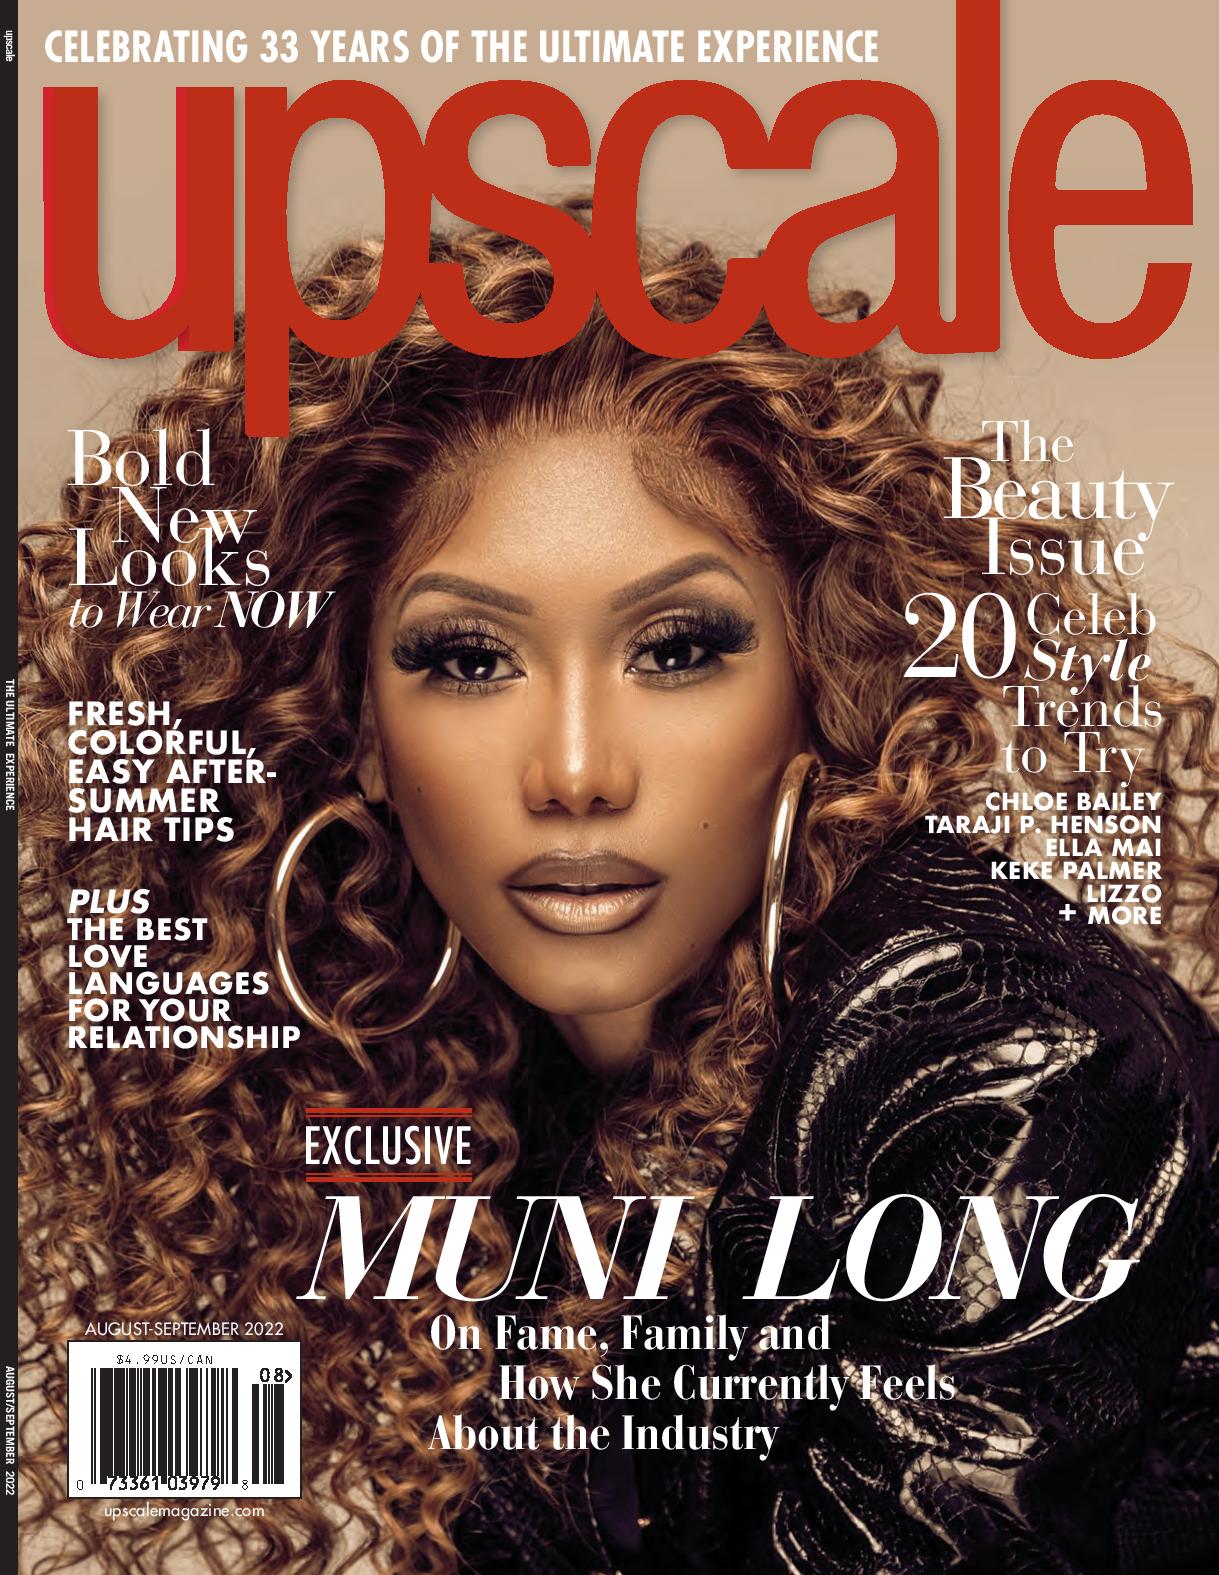 Upscale Magazine – August – September Edition